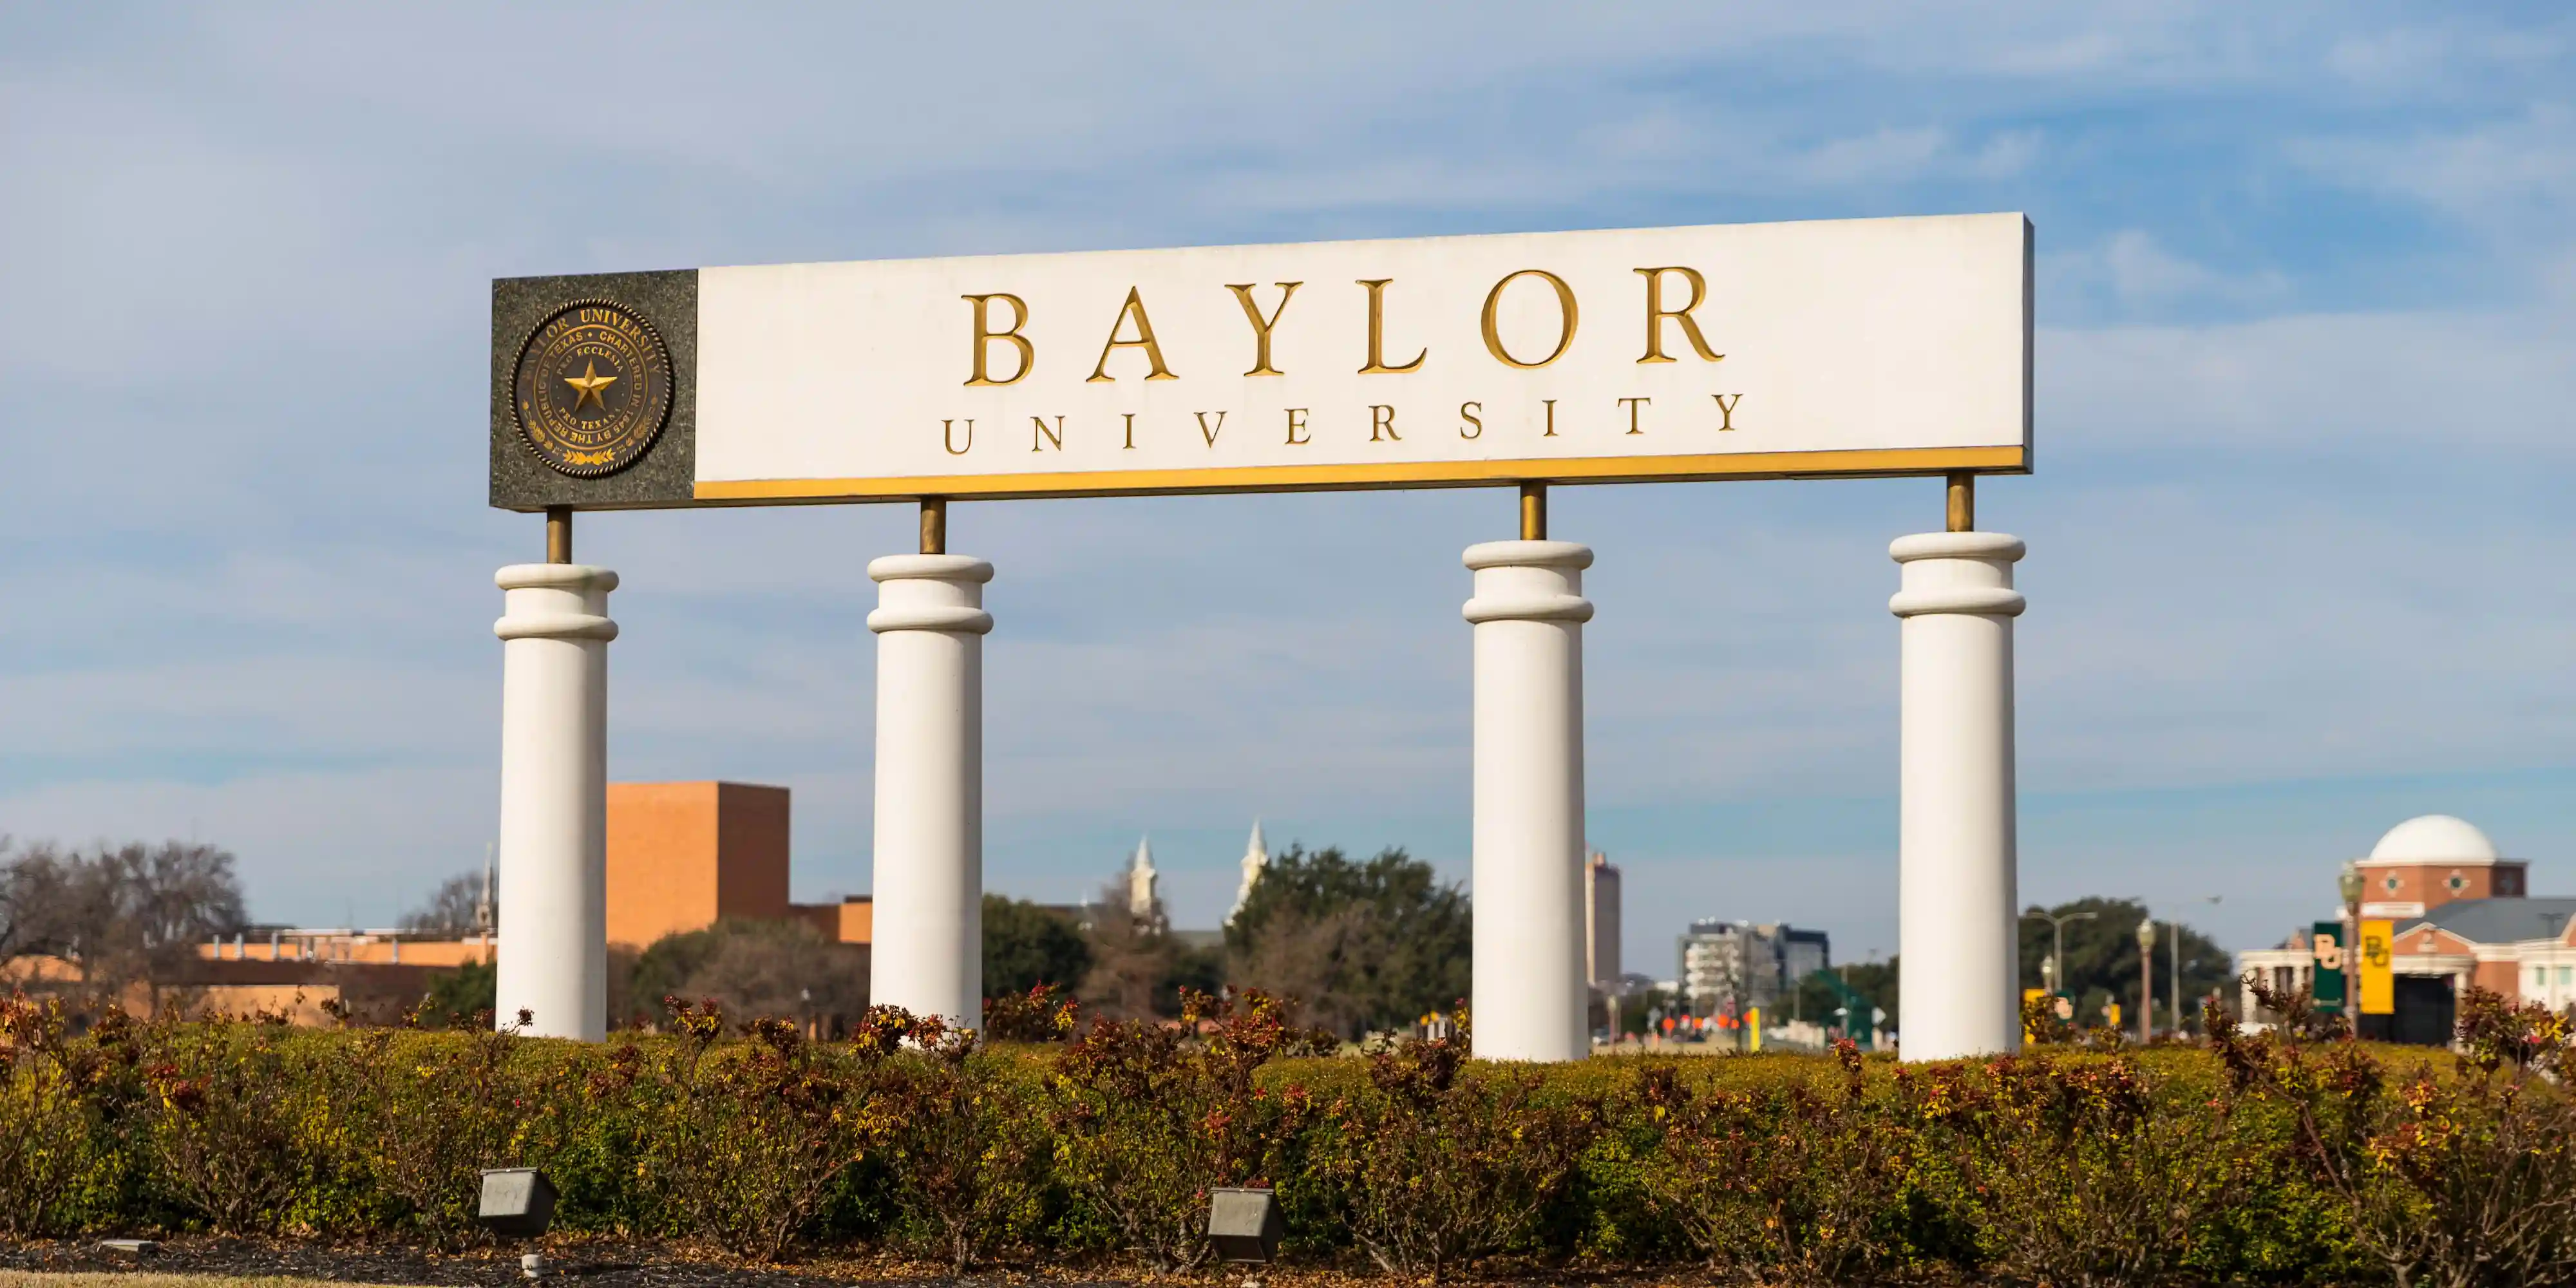 The entrance sign at Baylor University in Waco, TX